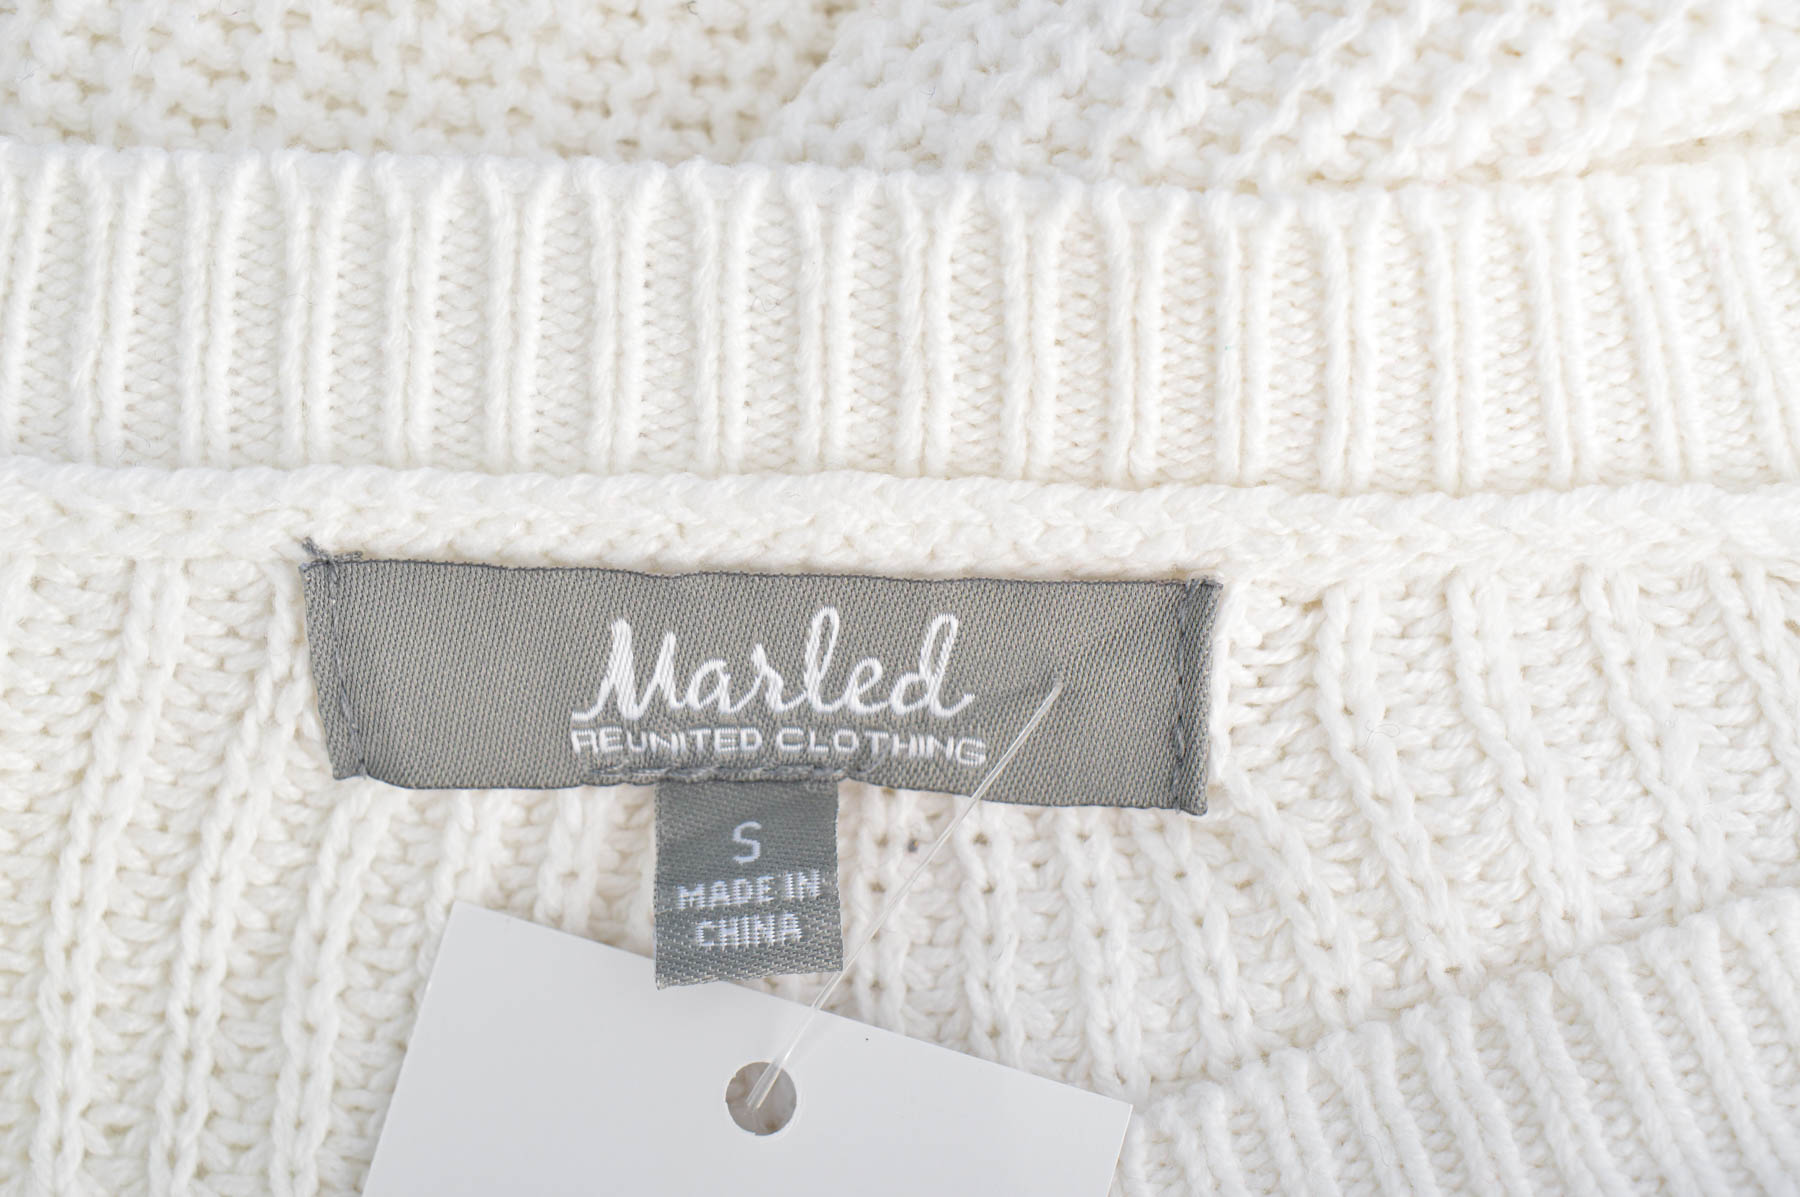 Women's sweater - Marled BY REUNITED CLOTHING - 2